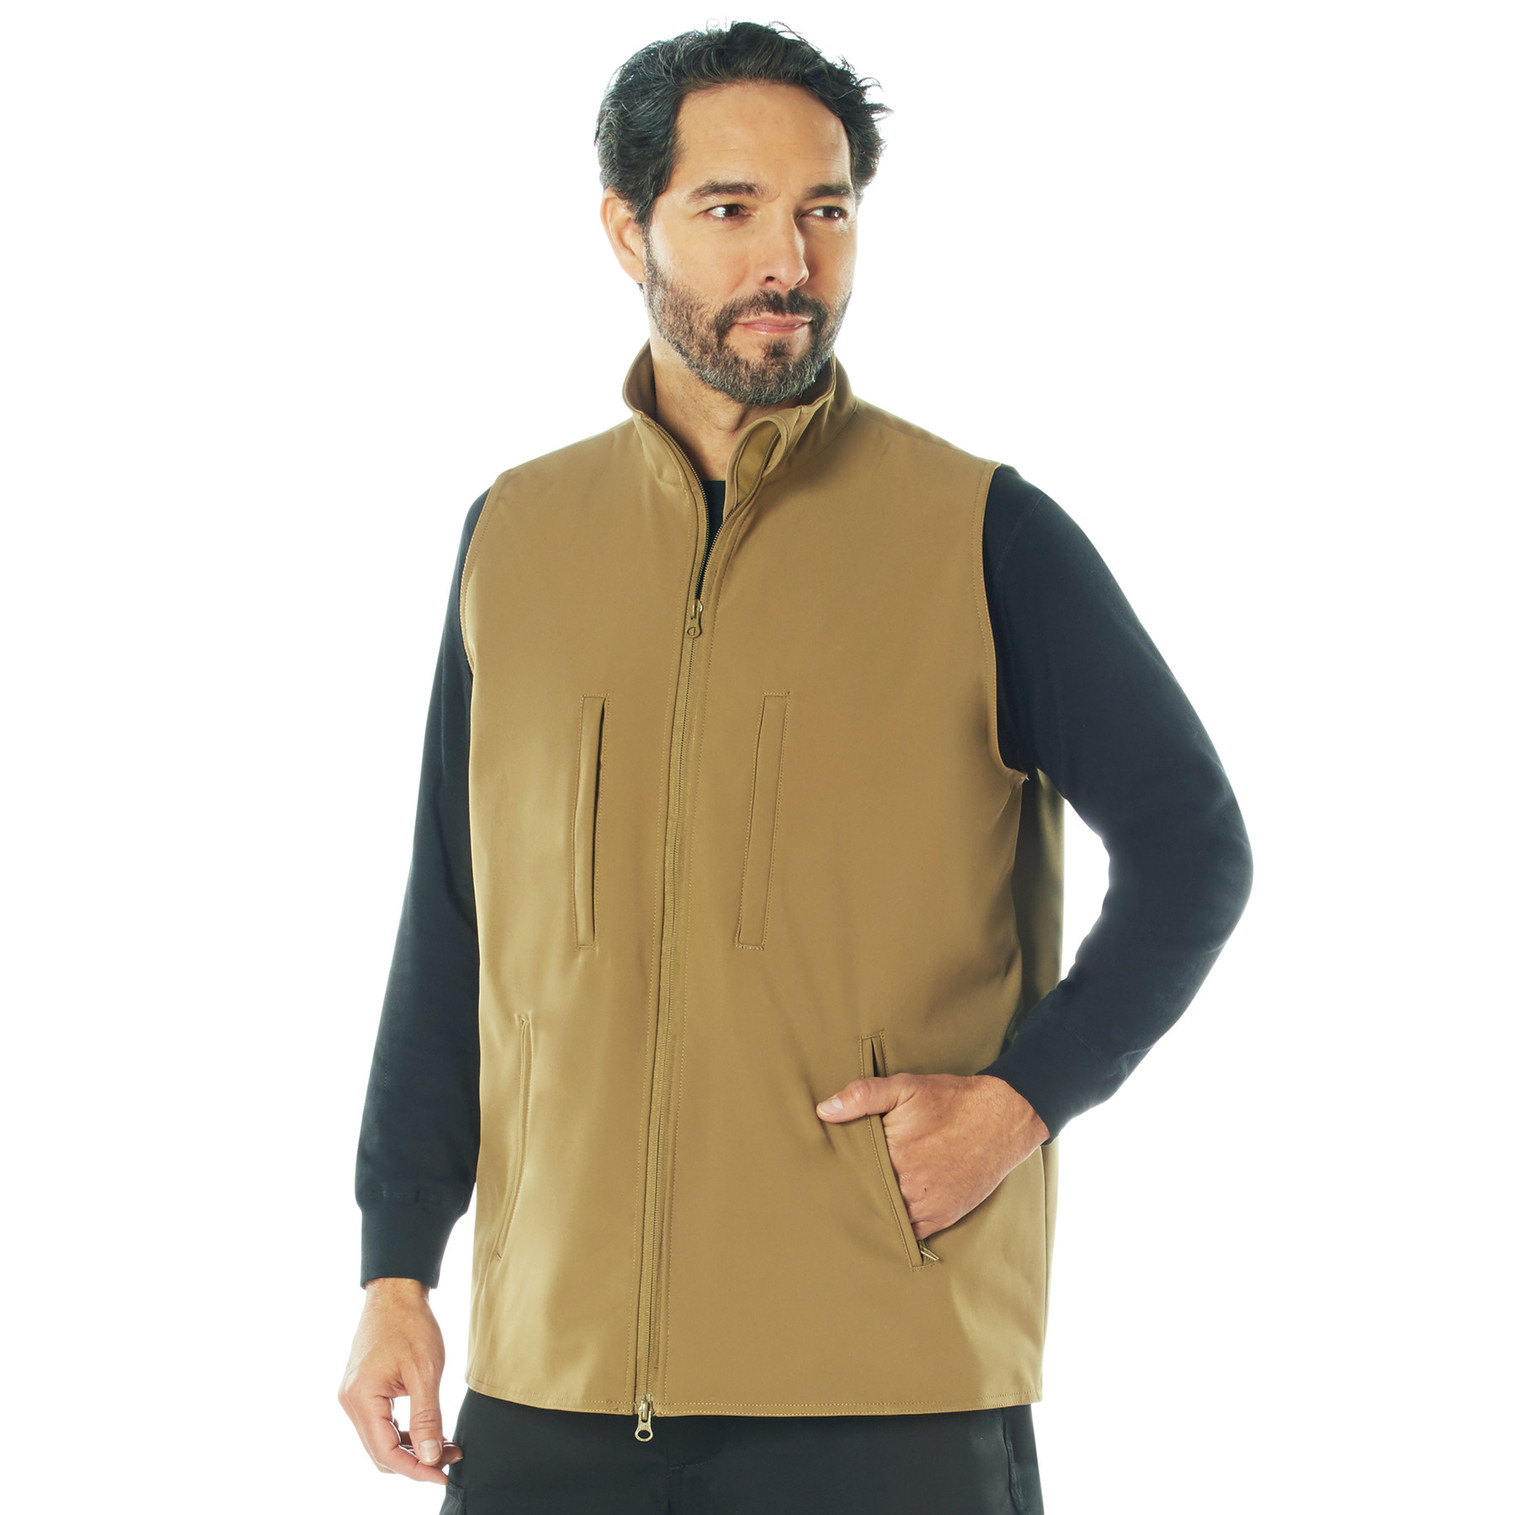 Rothco V2 Concealed Carry Soft Shell Vest - Coyote Brown